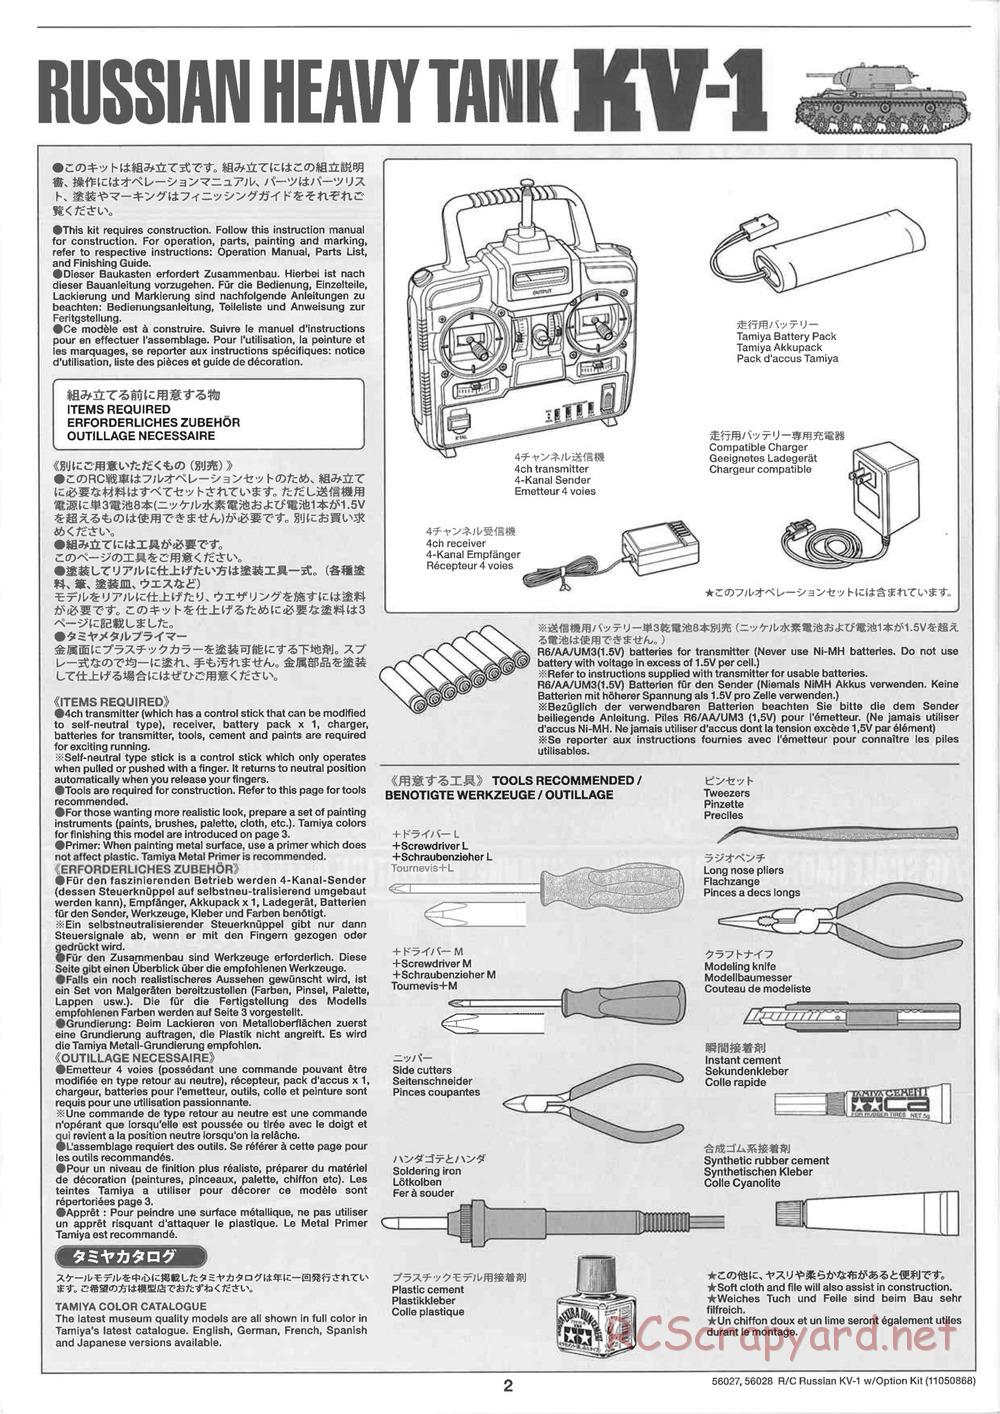 Tamiya - Russian Heavy Tank KV-1 - 1/16 Scale Chassis - Manual - Page 2